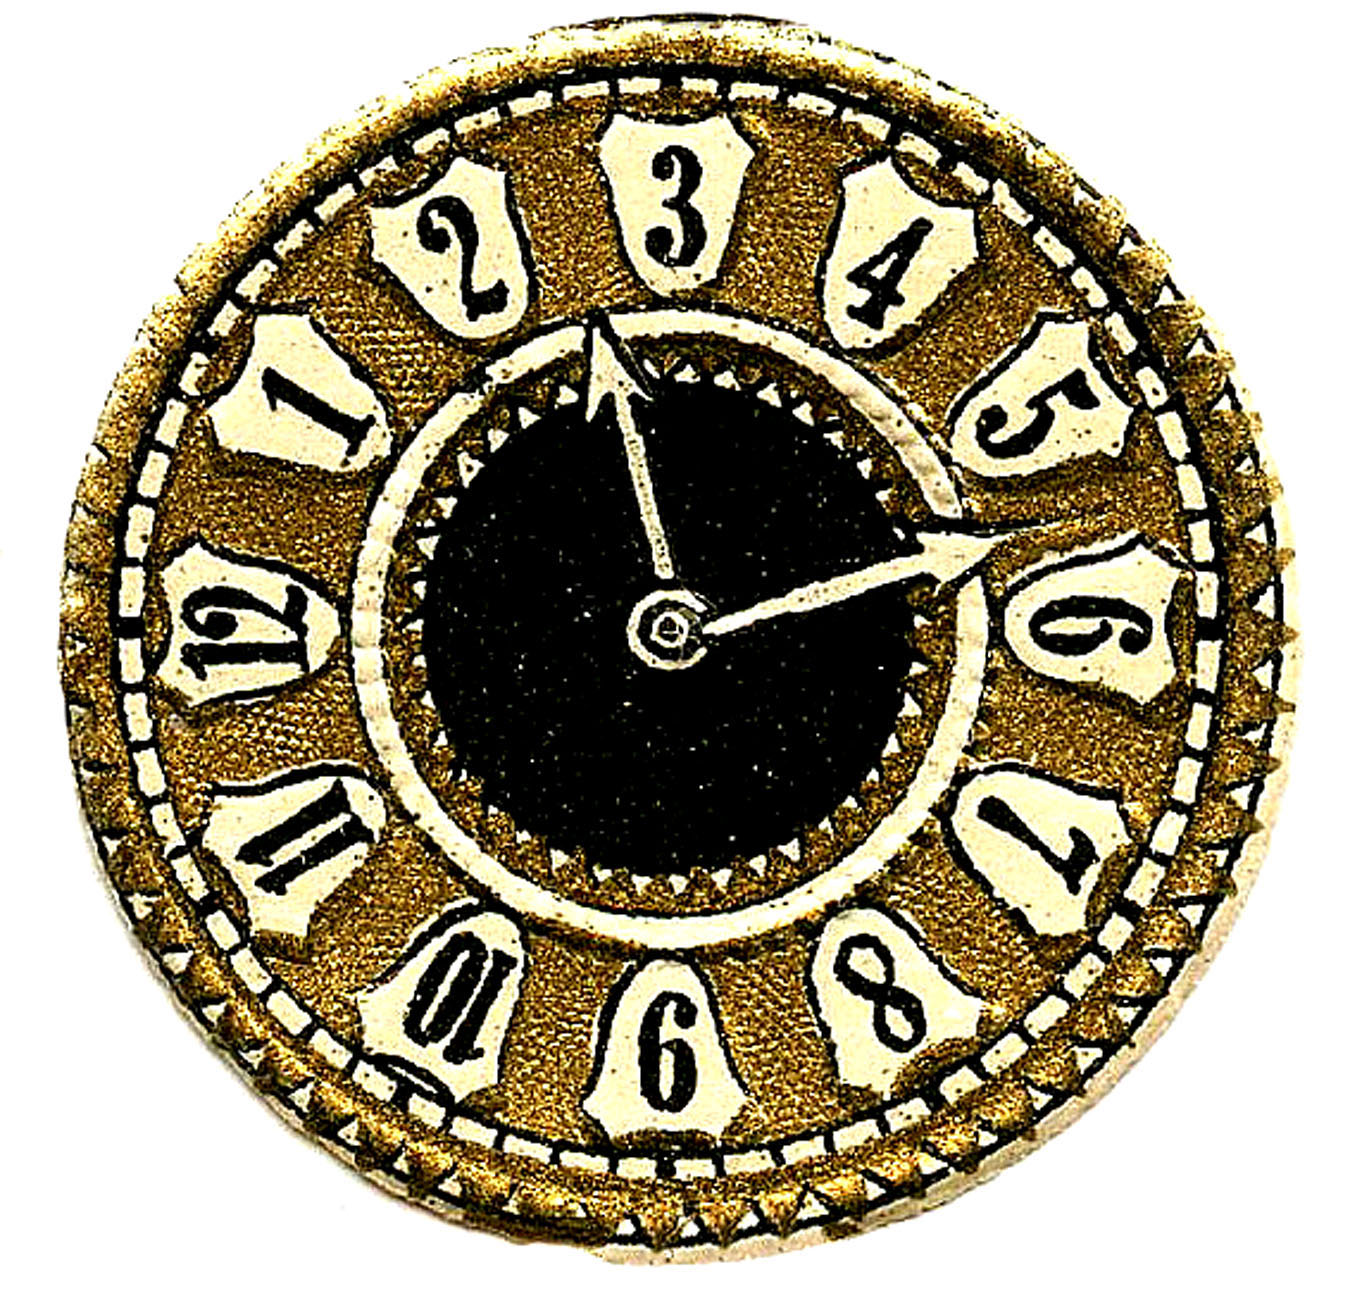 12 Clock Face Images Print Your Own The Graphics Fairy